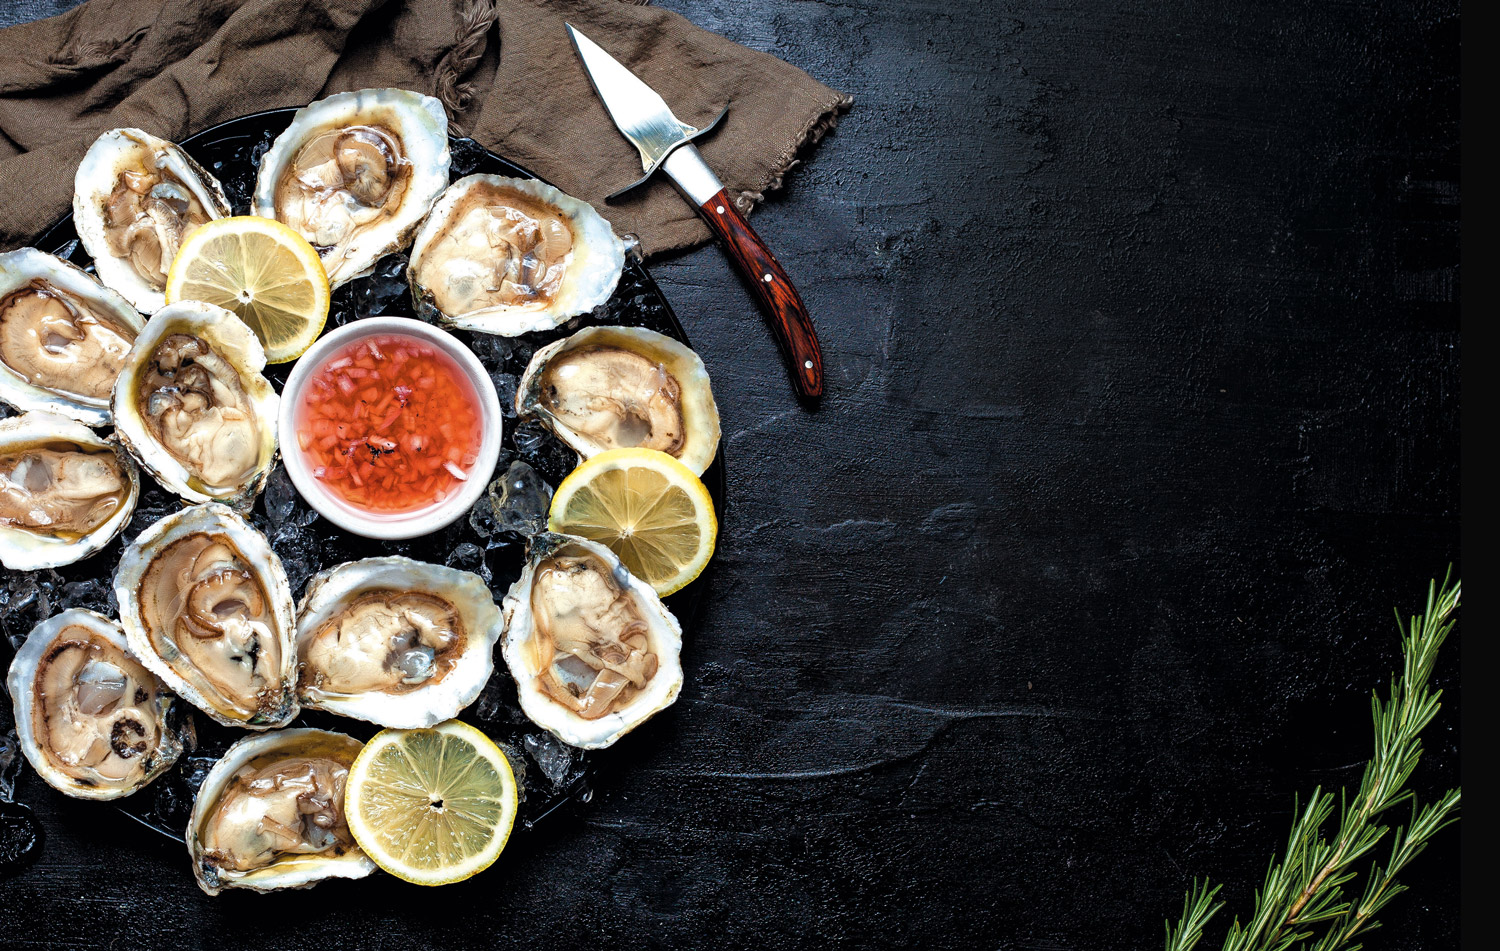 Plate of raw oysters